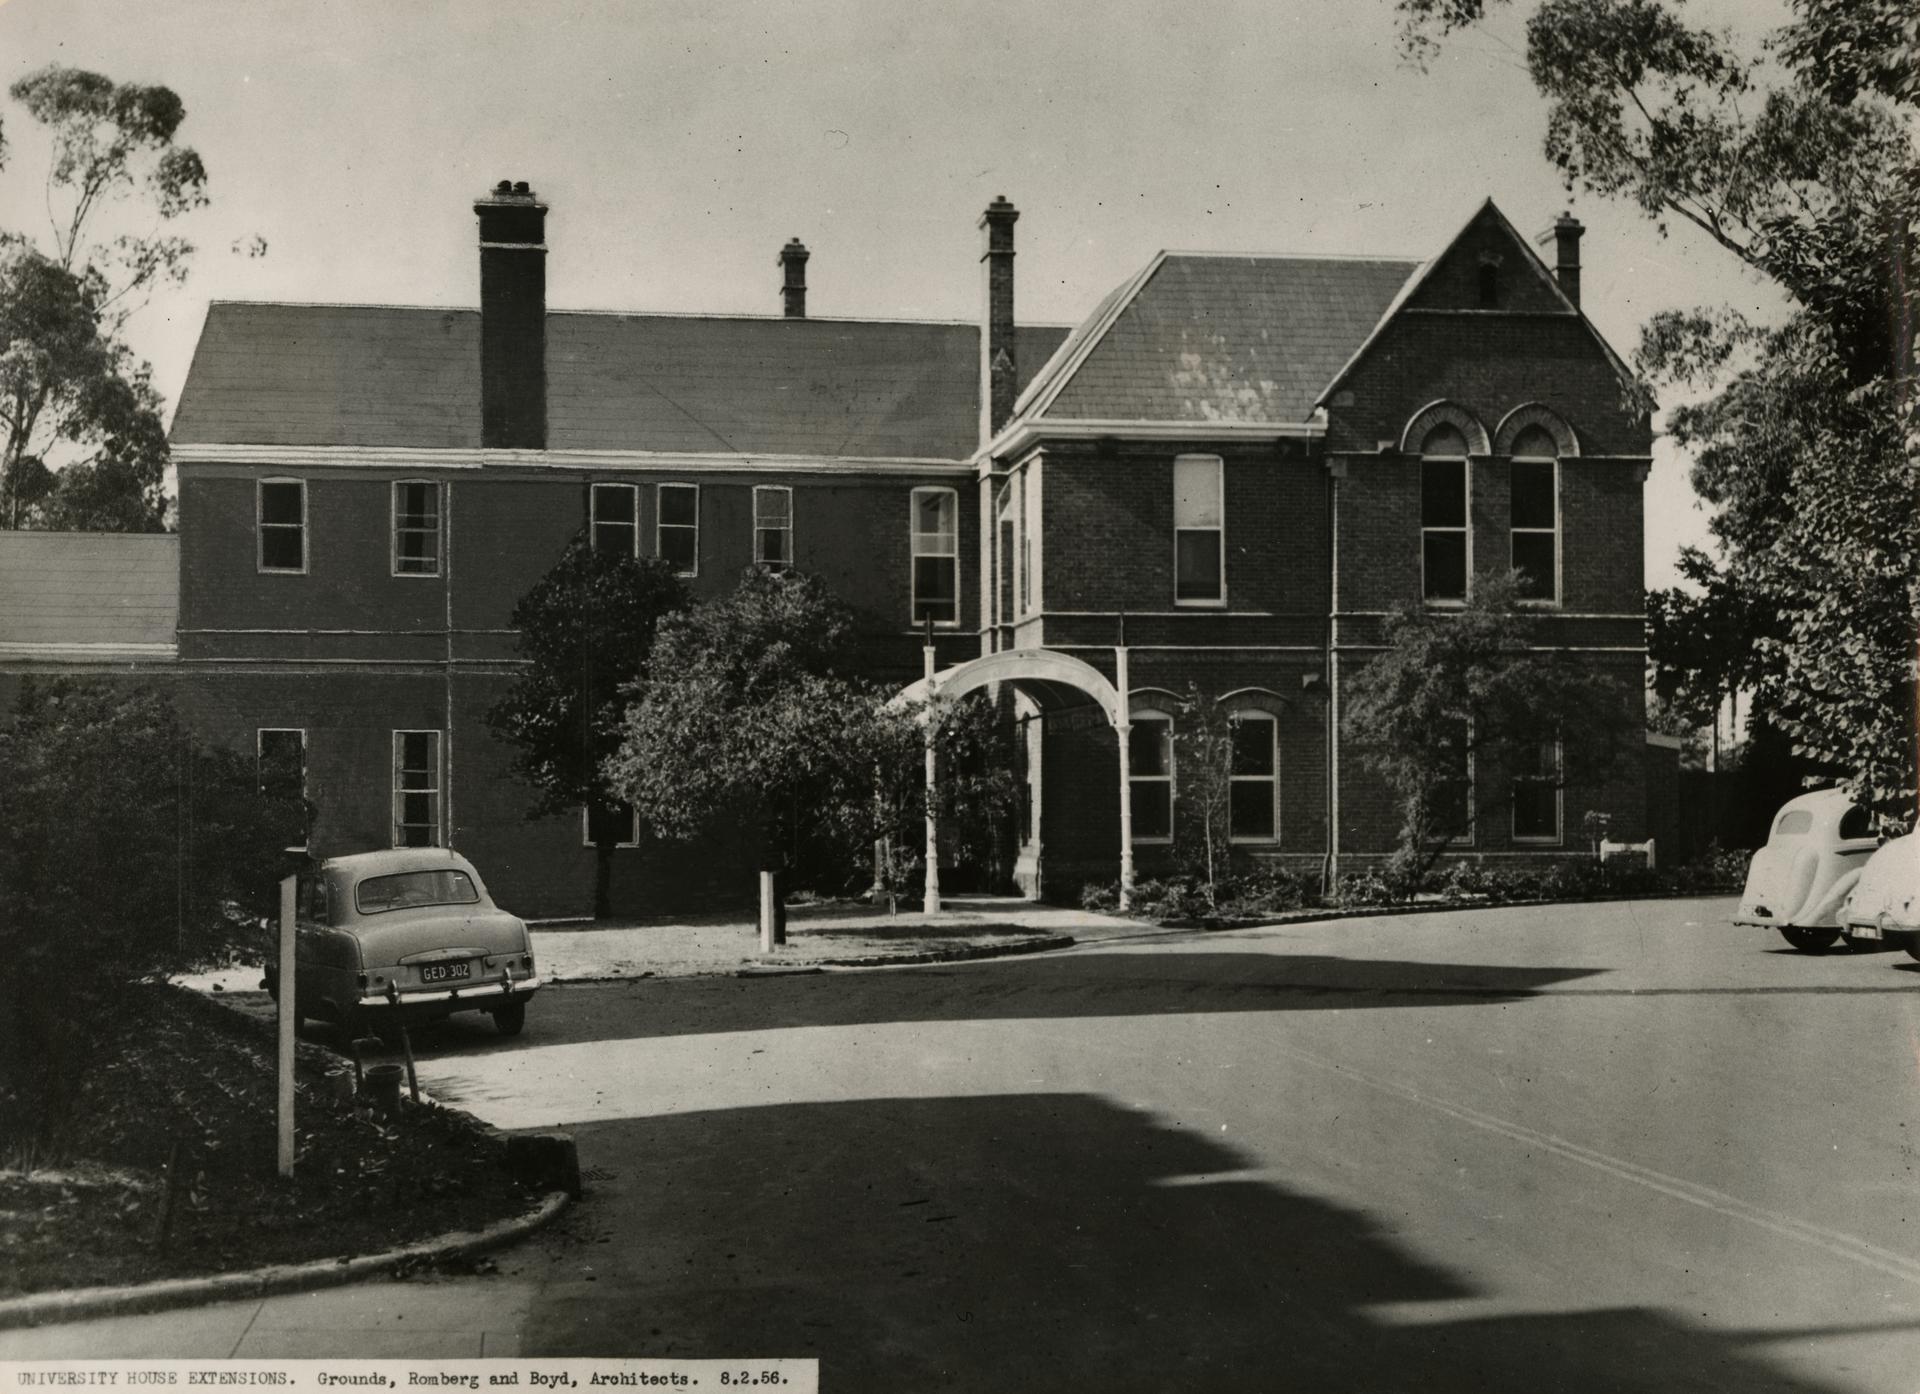 University House extensions, 1956